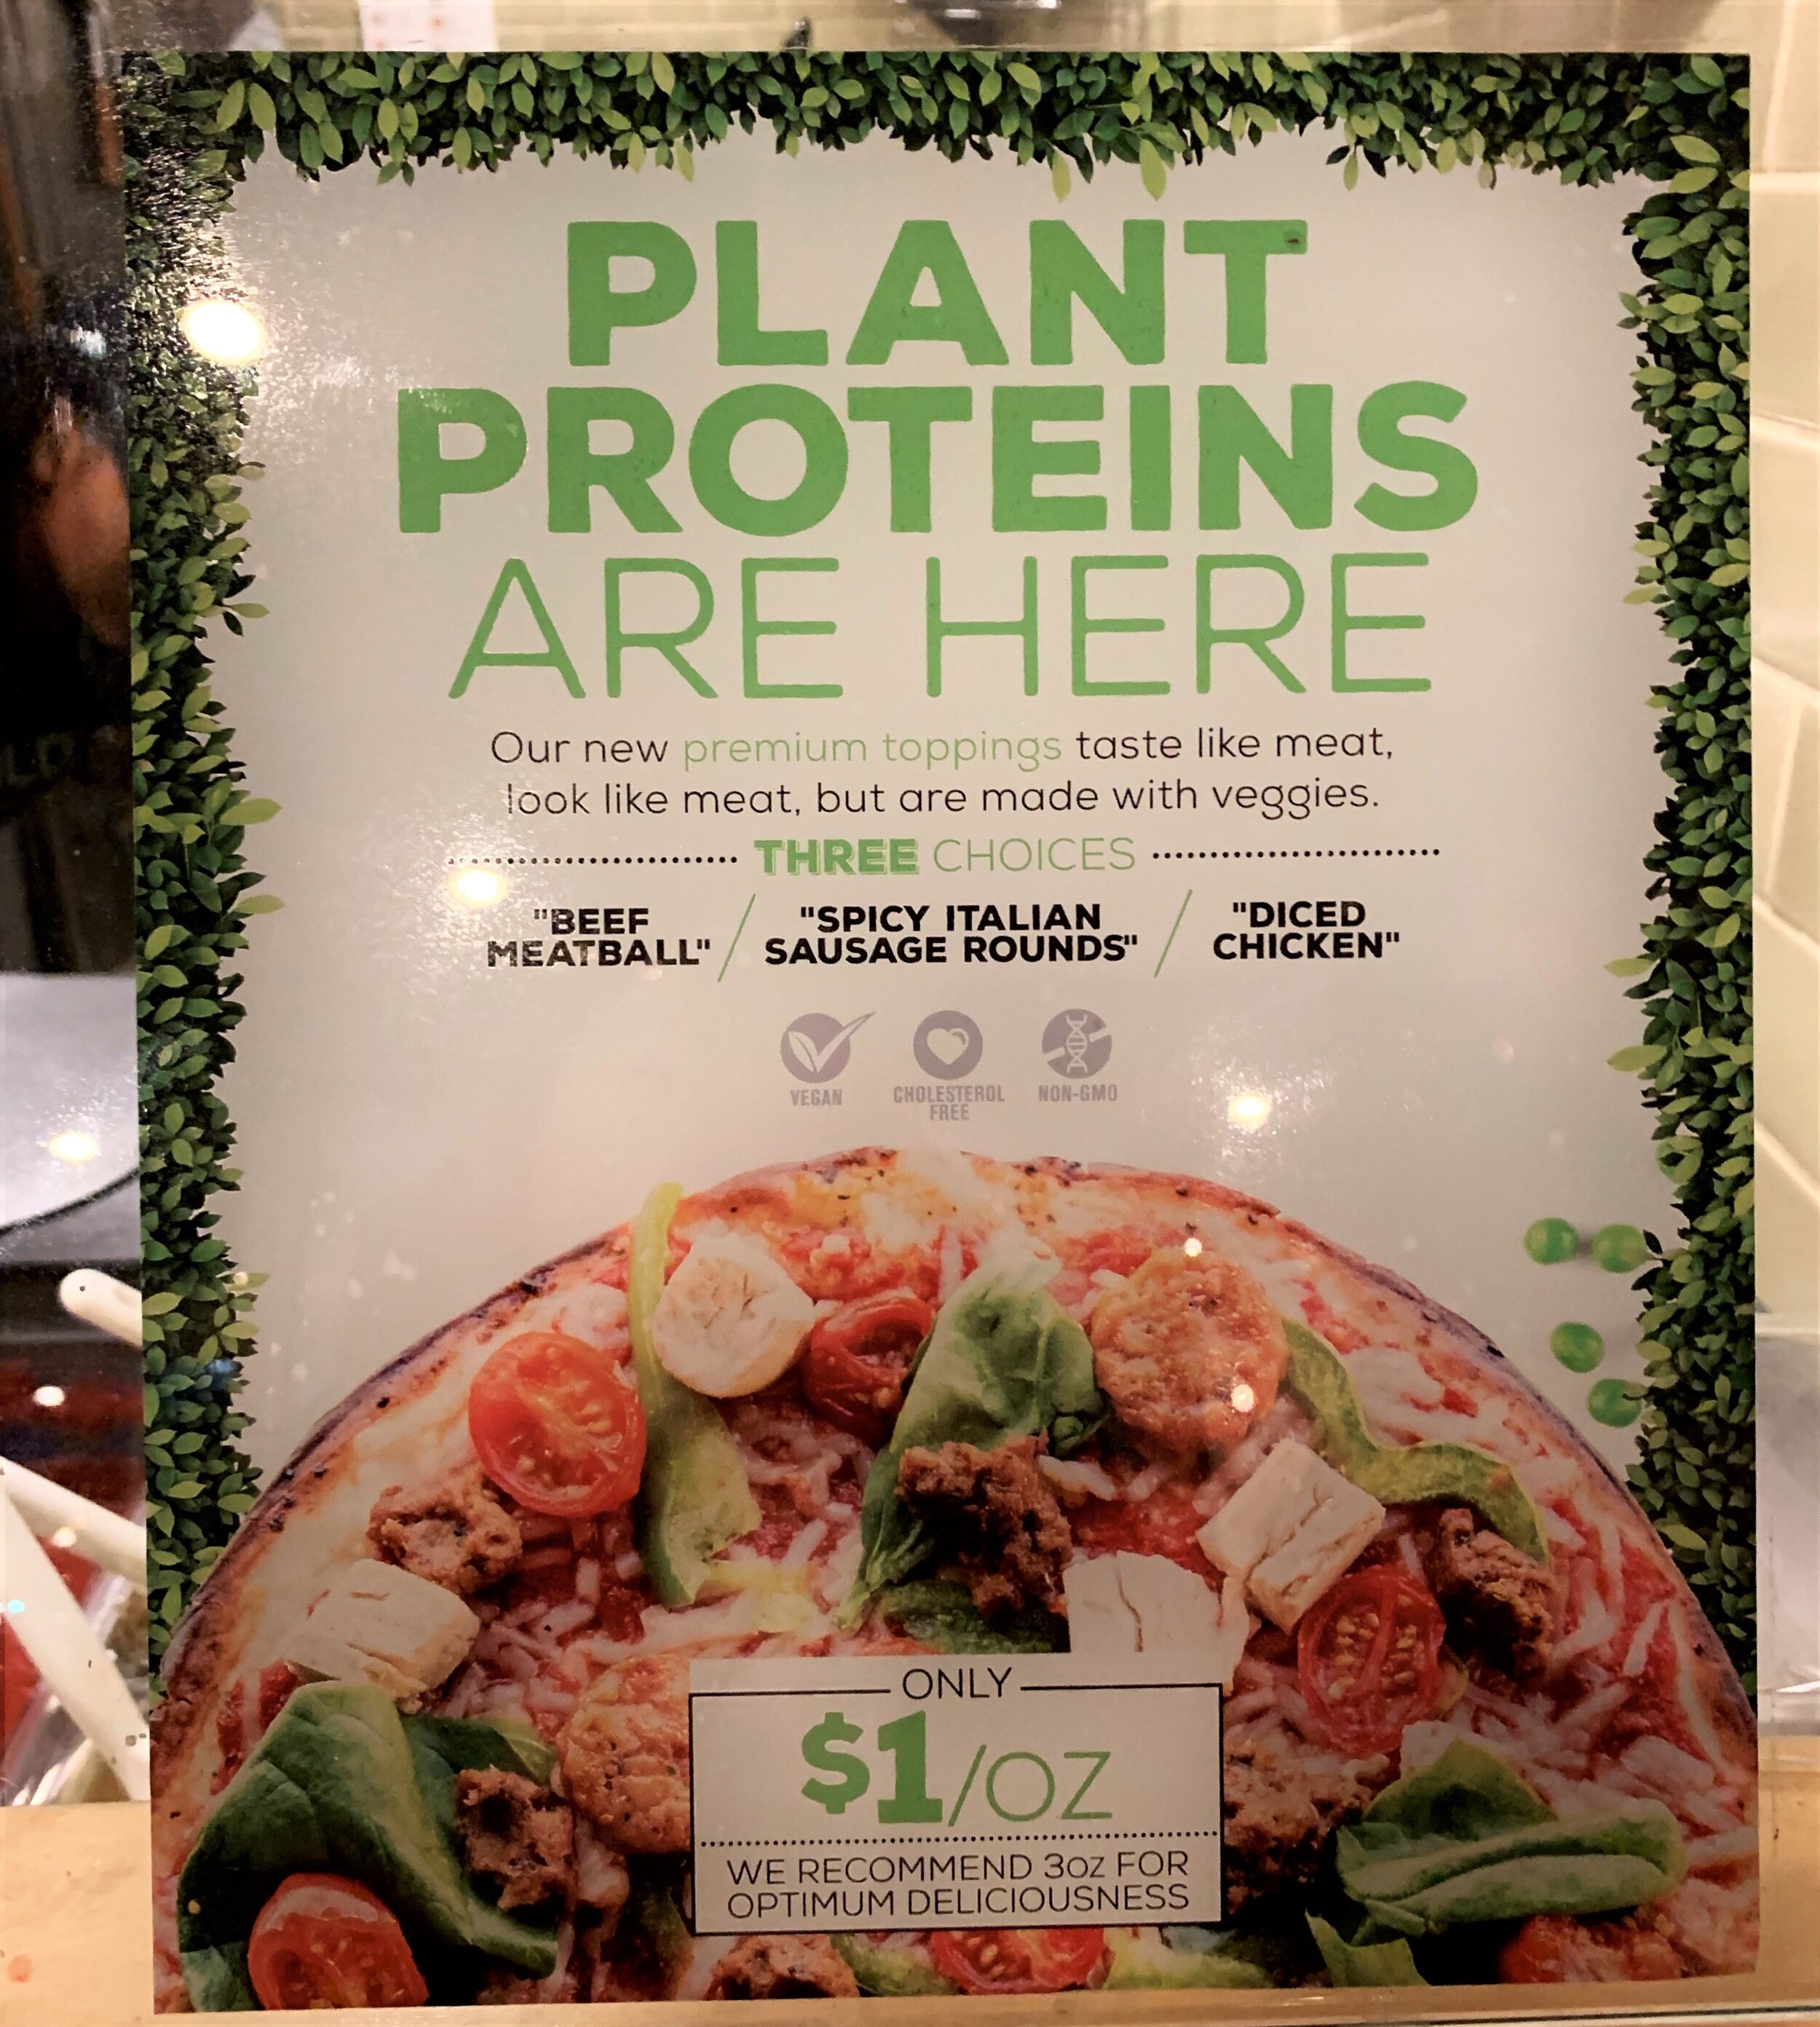 A sign at Pieology Pizzeria that says "plant proteins are here" including beef meatballs, spicy Italian sausage, and diced chicken. It's also tagged as vegan, cholesterol free, and non-gmo.